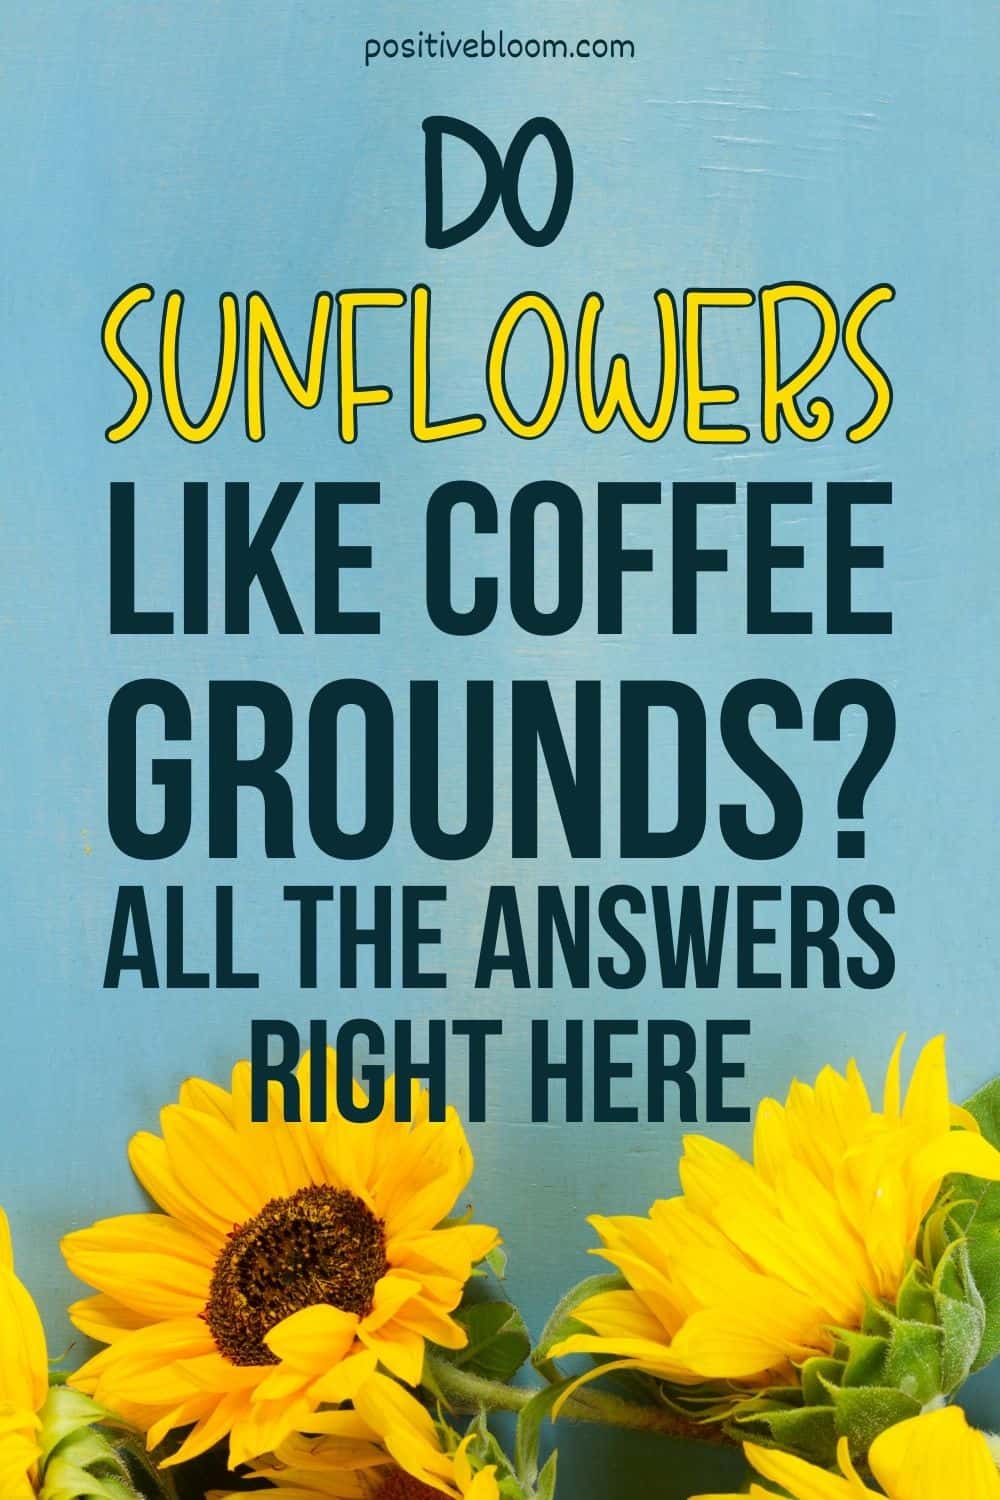 Do Sunflowers Like Coffee Grounds All The Answers Right Here Pinterest